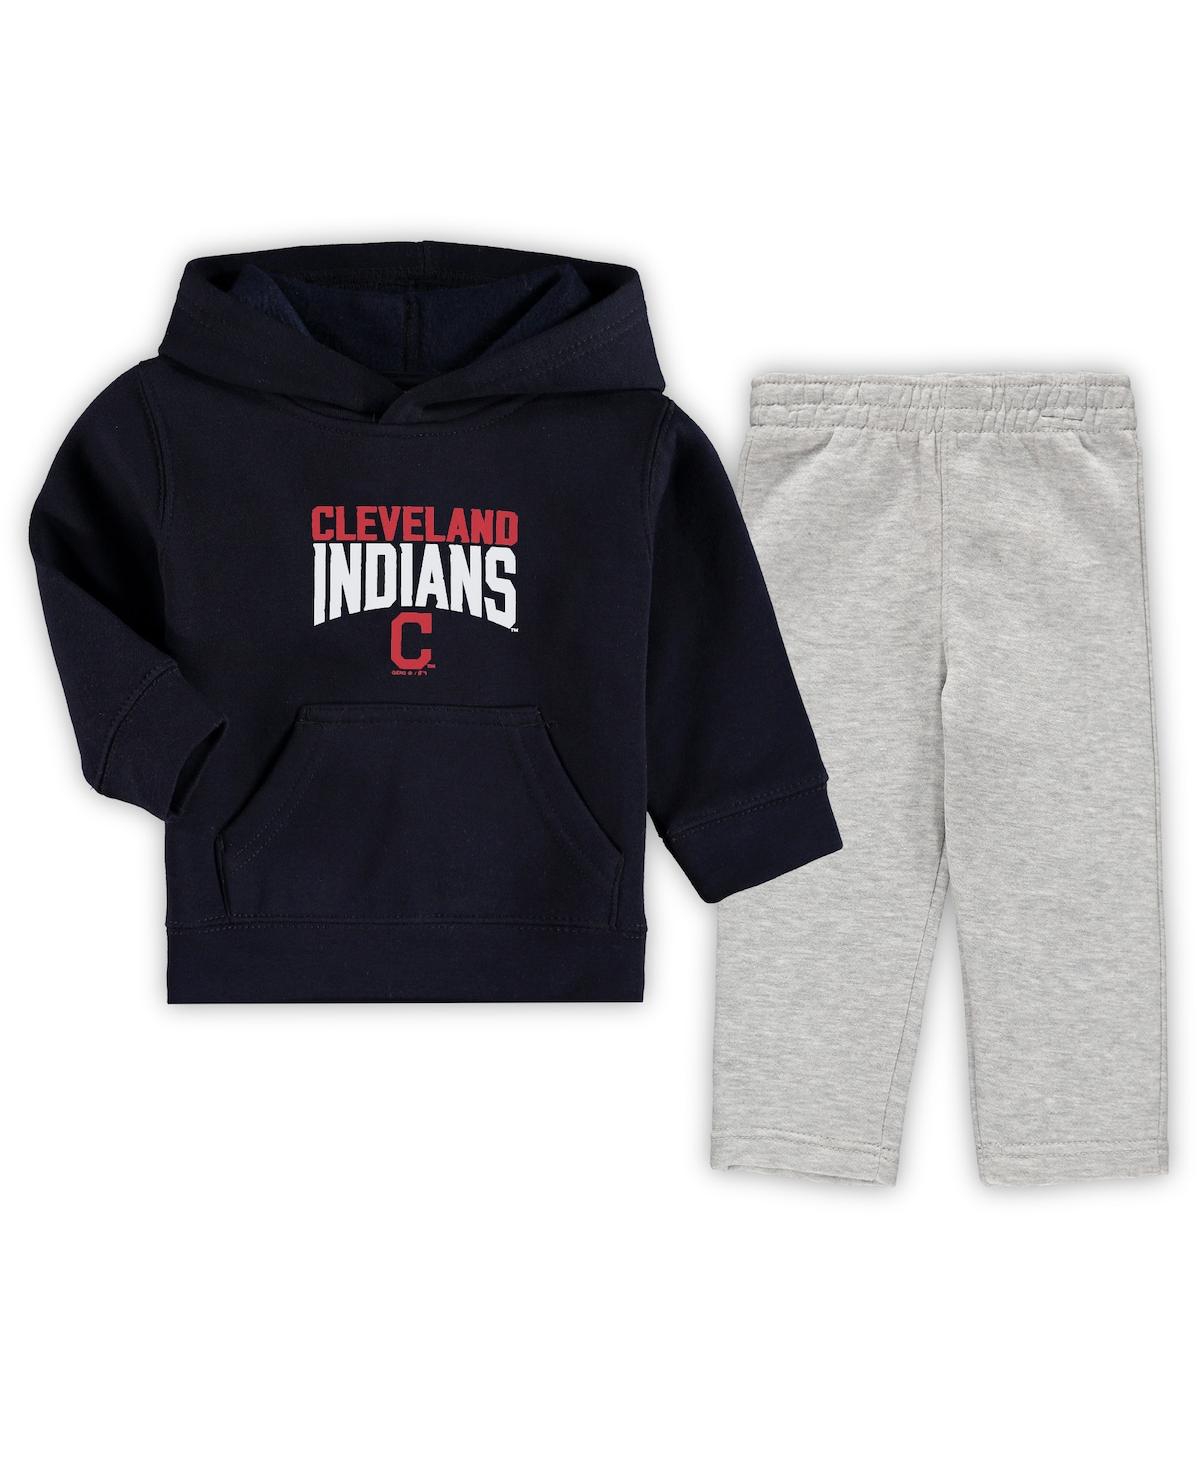 Outerstuff Babies' Infant Boys And Girls Navy, Heathered Gray Cleveland Indians Fan Flare Fleece Hoodie And Pants Set In Navy,heathered Gray